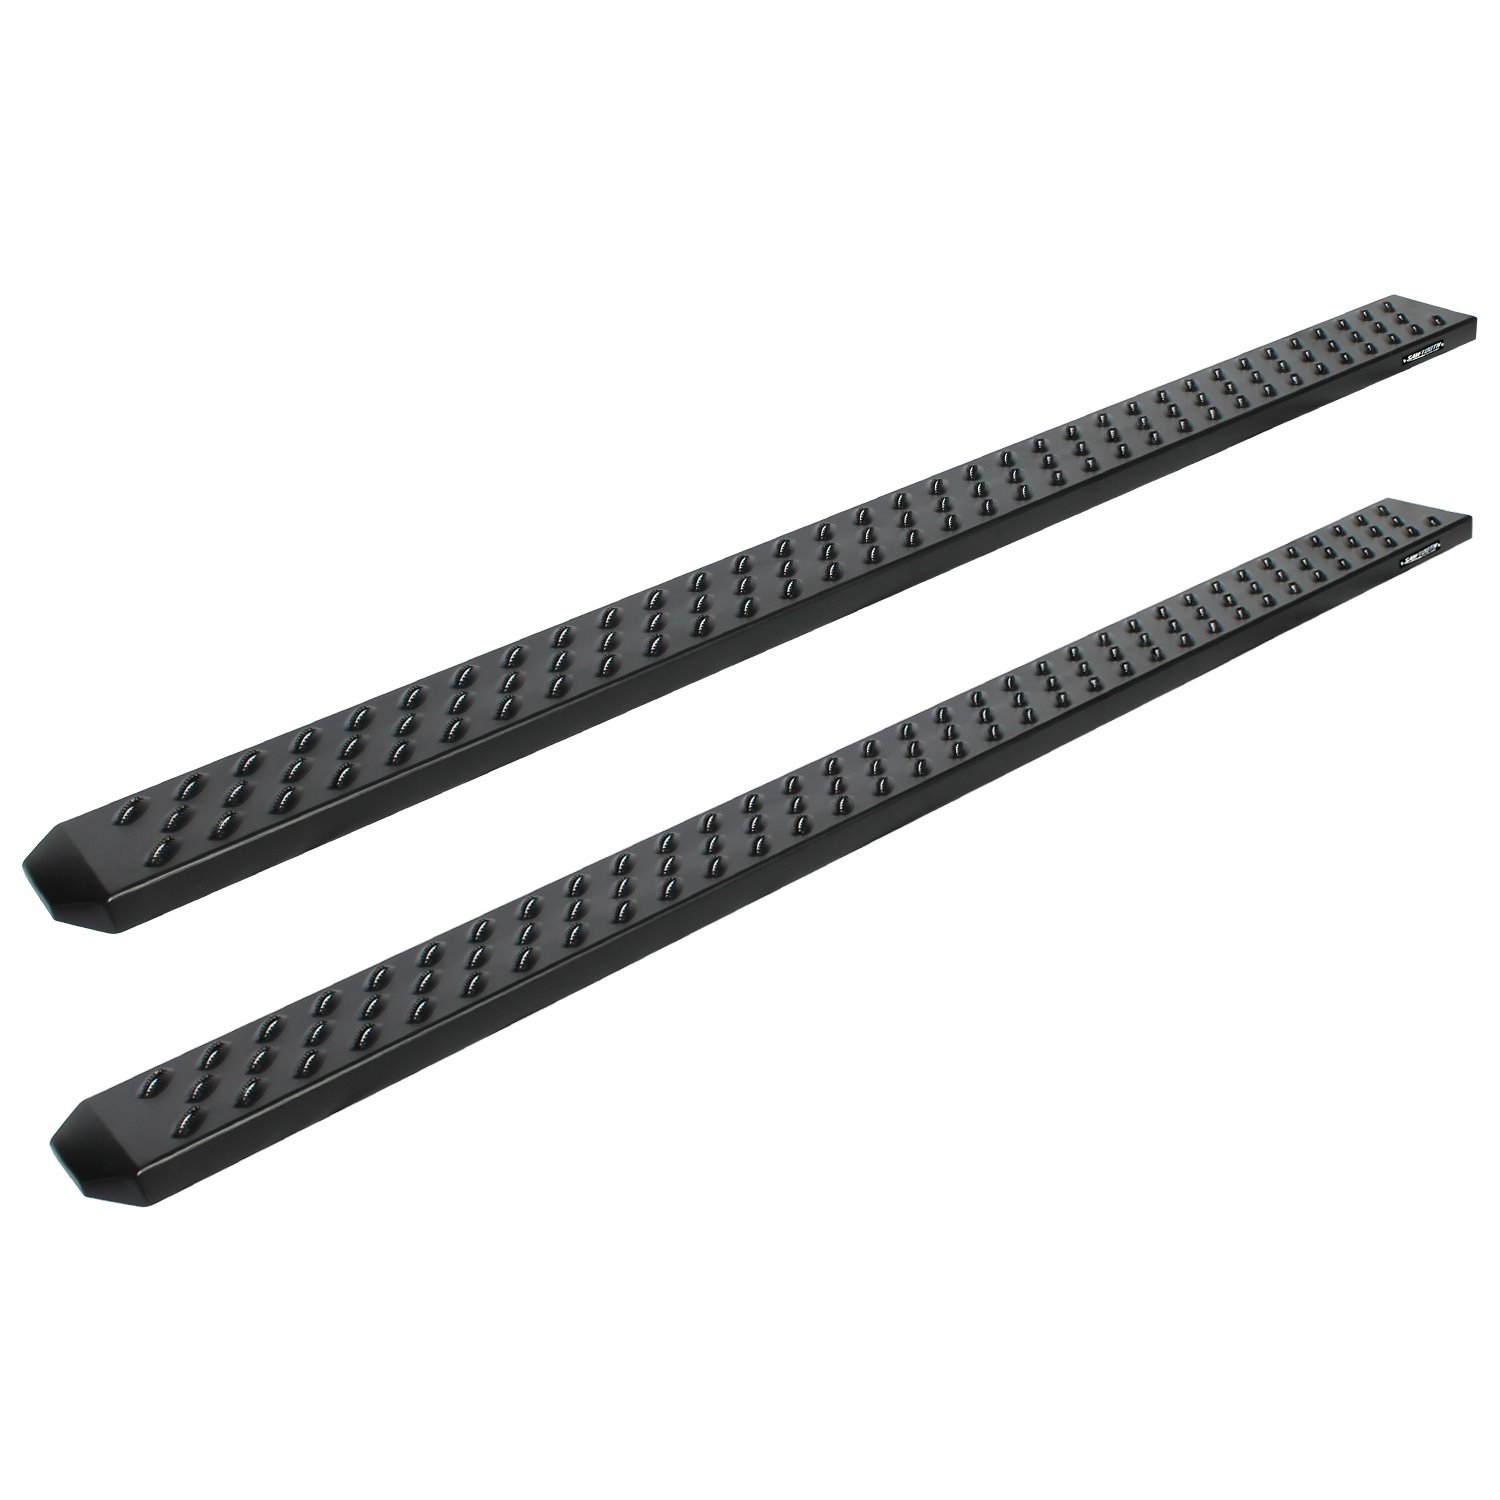 2102-0602BT 6.5 in Sawtooth Slide Track Running Boards, Black Aluminum, Fits Select Dodge Ram 1500 New Body Style Crew Cab